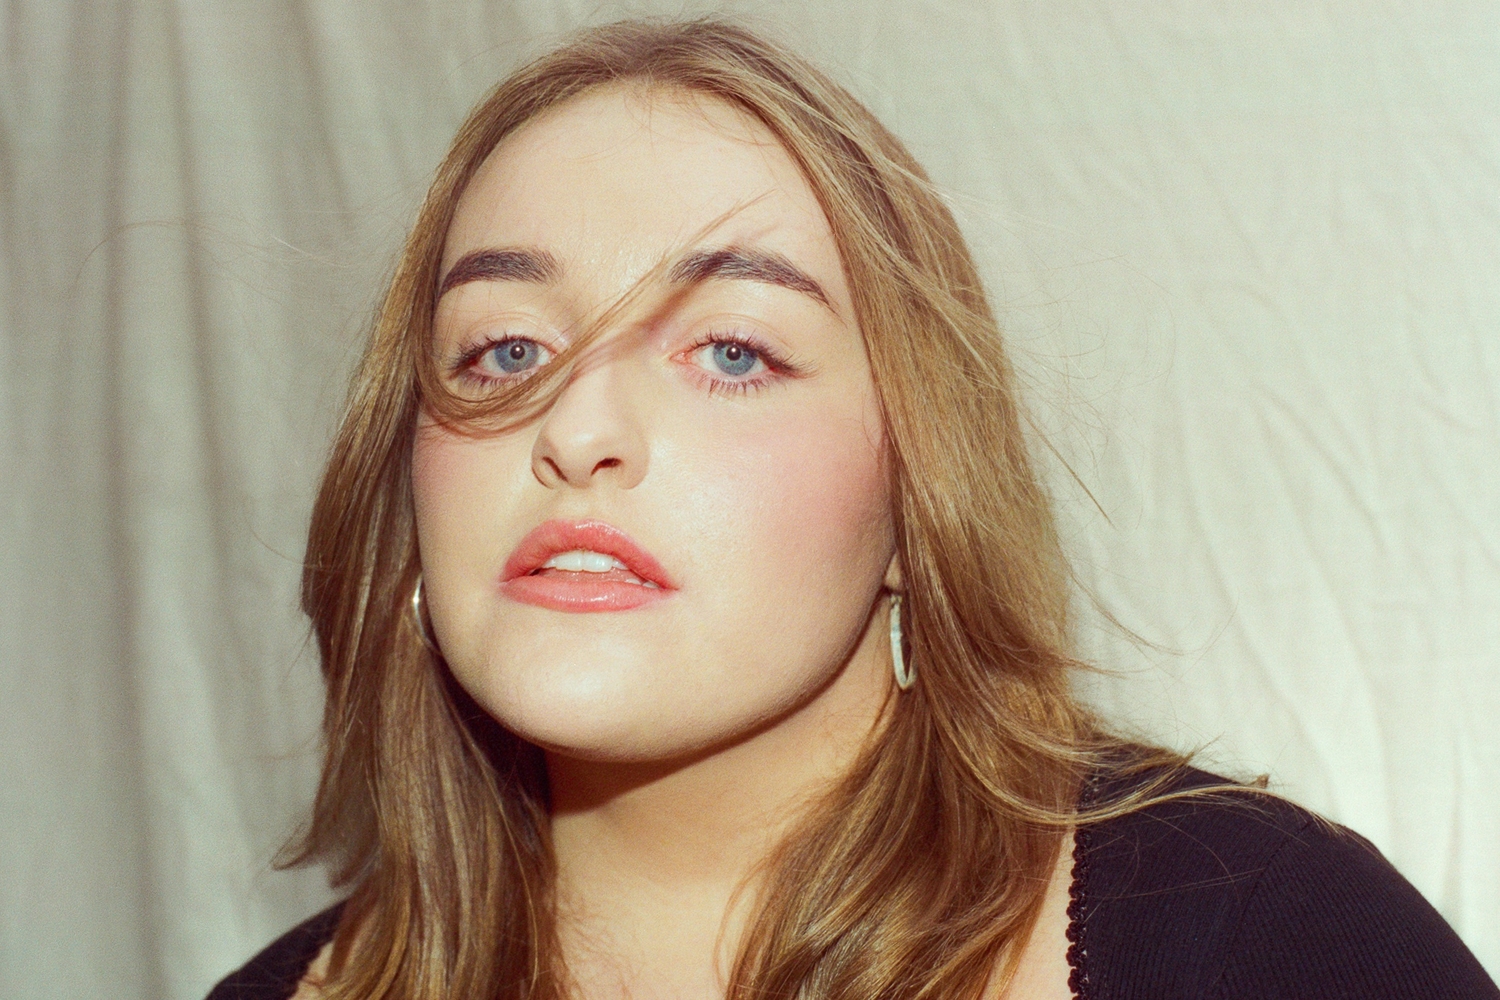 Nell Mescal releases new single 'Warm Body' ahead of her debut EP 'Can I Miss It For A Minute?’